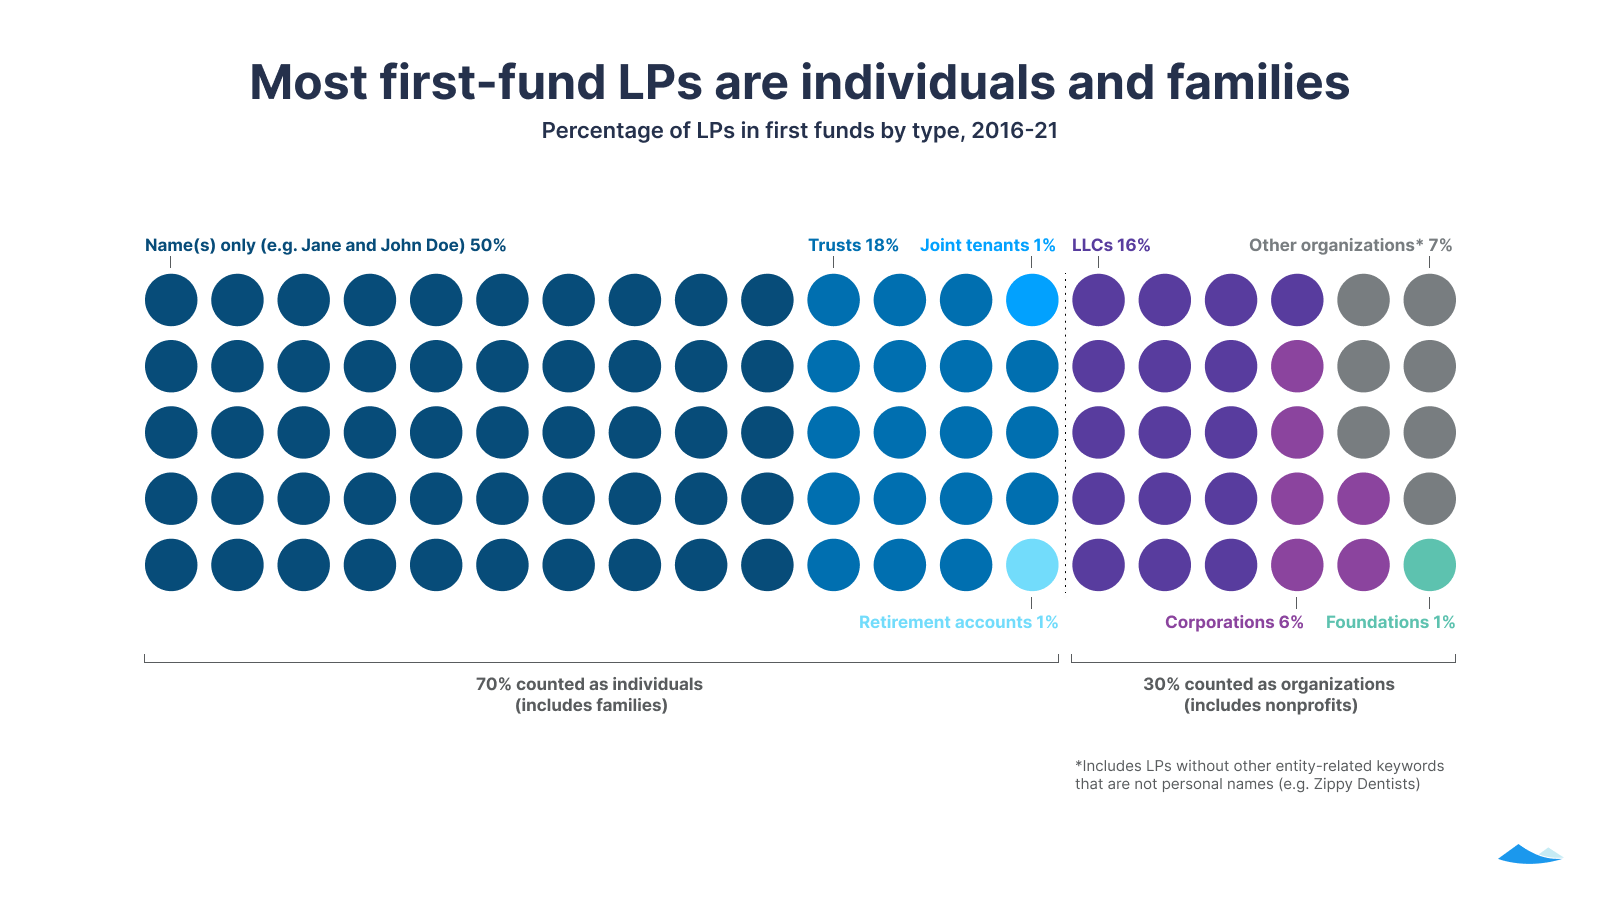 Most first-fund LPs are individuals and families: Percentage of LPs in first funds by type, 2016-21